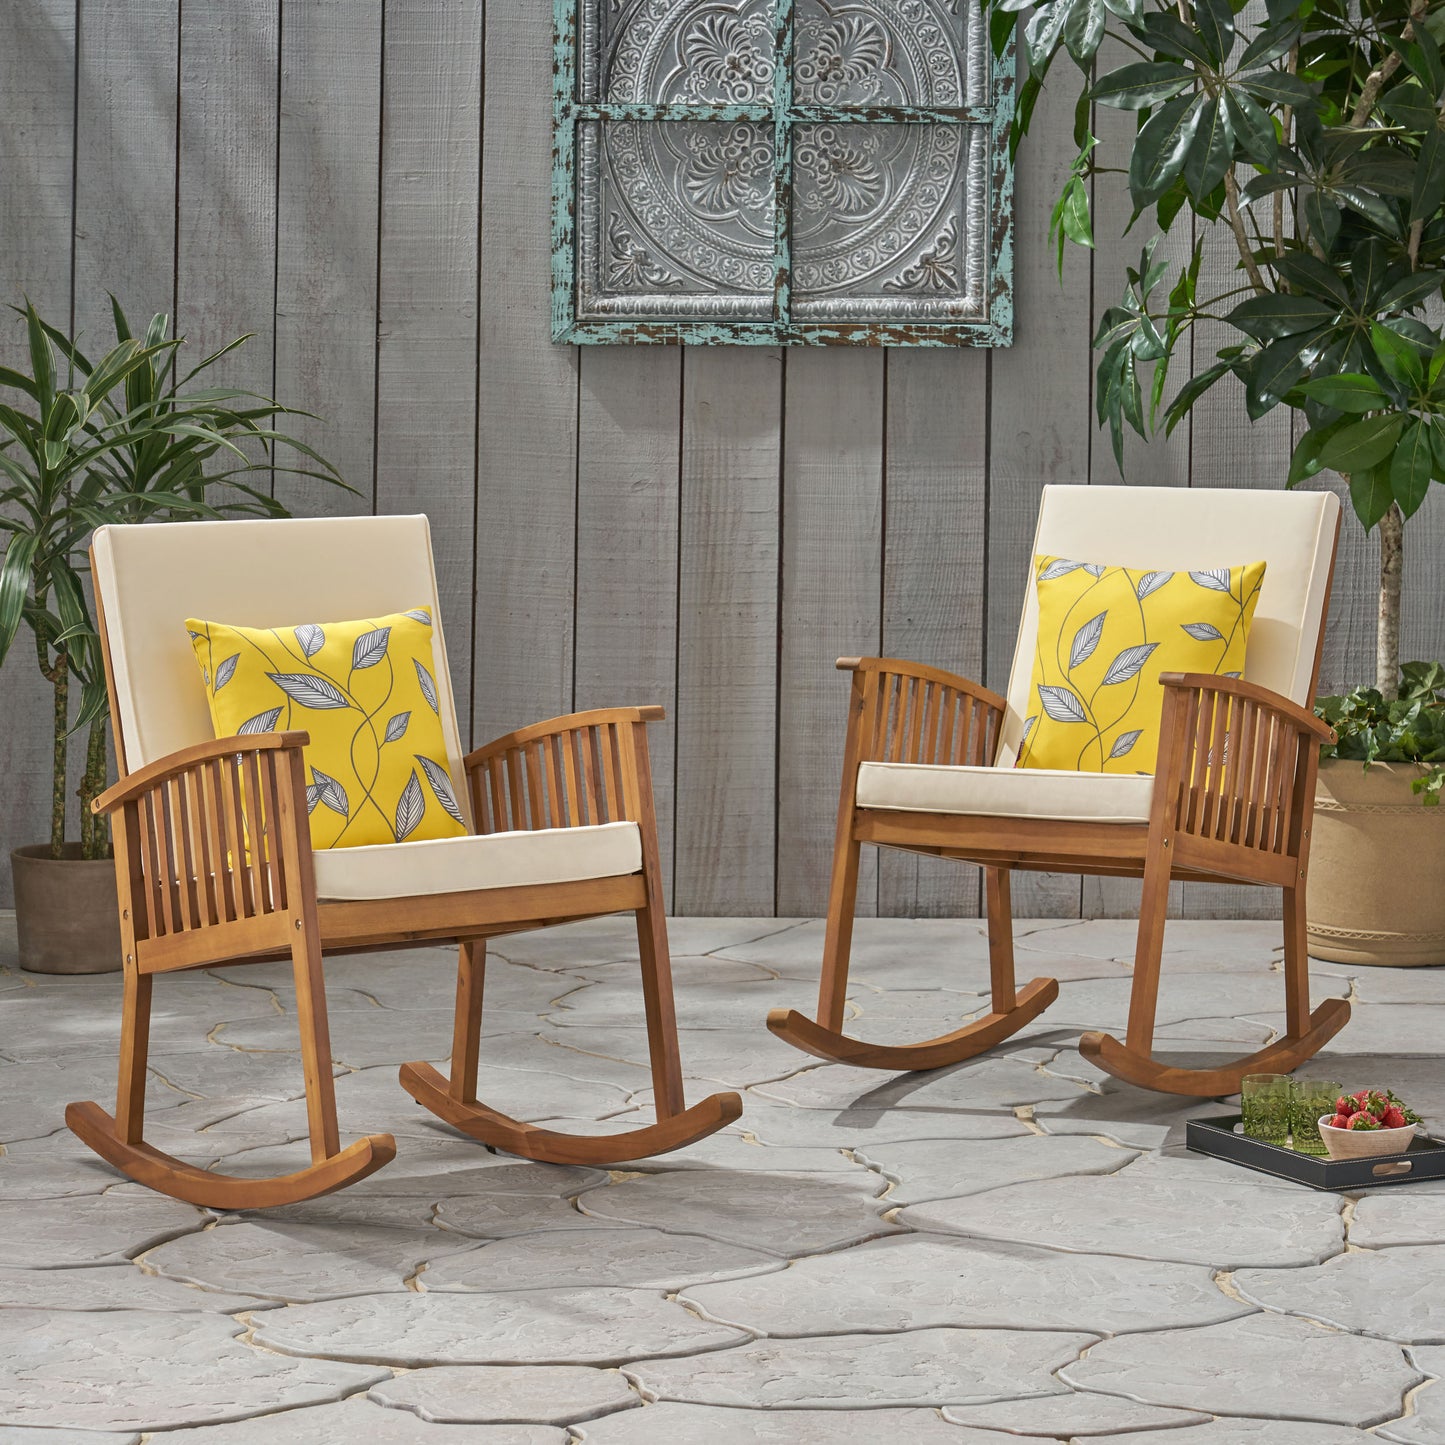 Audrey Outdoor Acacia Wood Rocking Chairs (Set of 2)